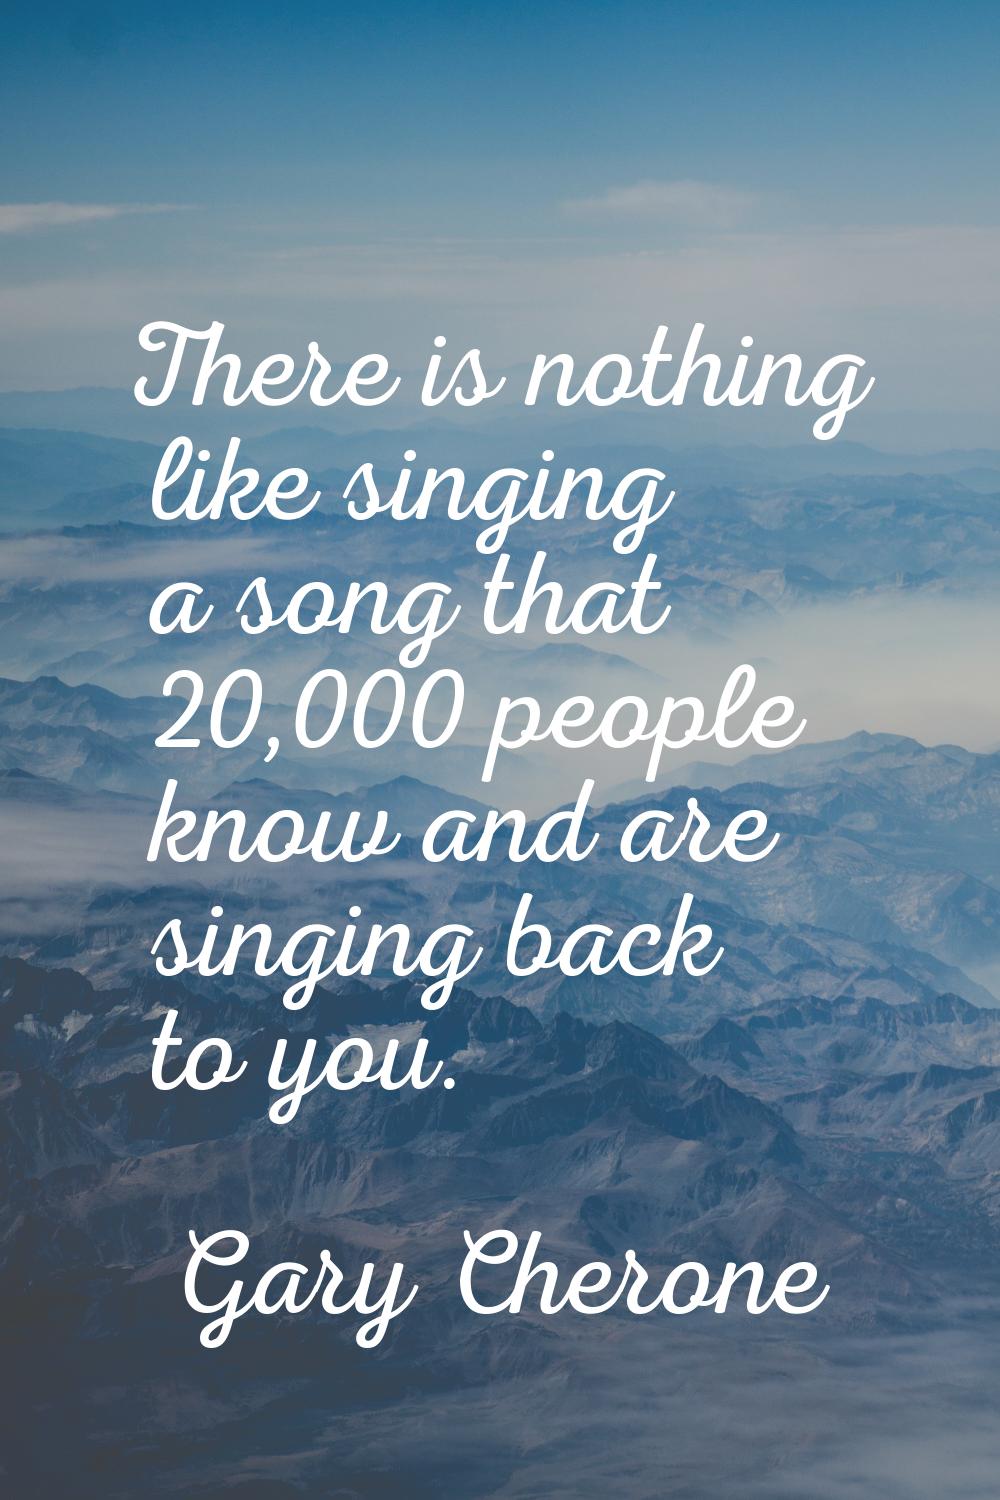 There is nothing like singing a song that 20,000 people know and are singing back to you.